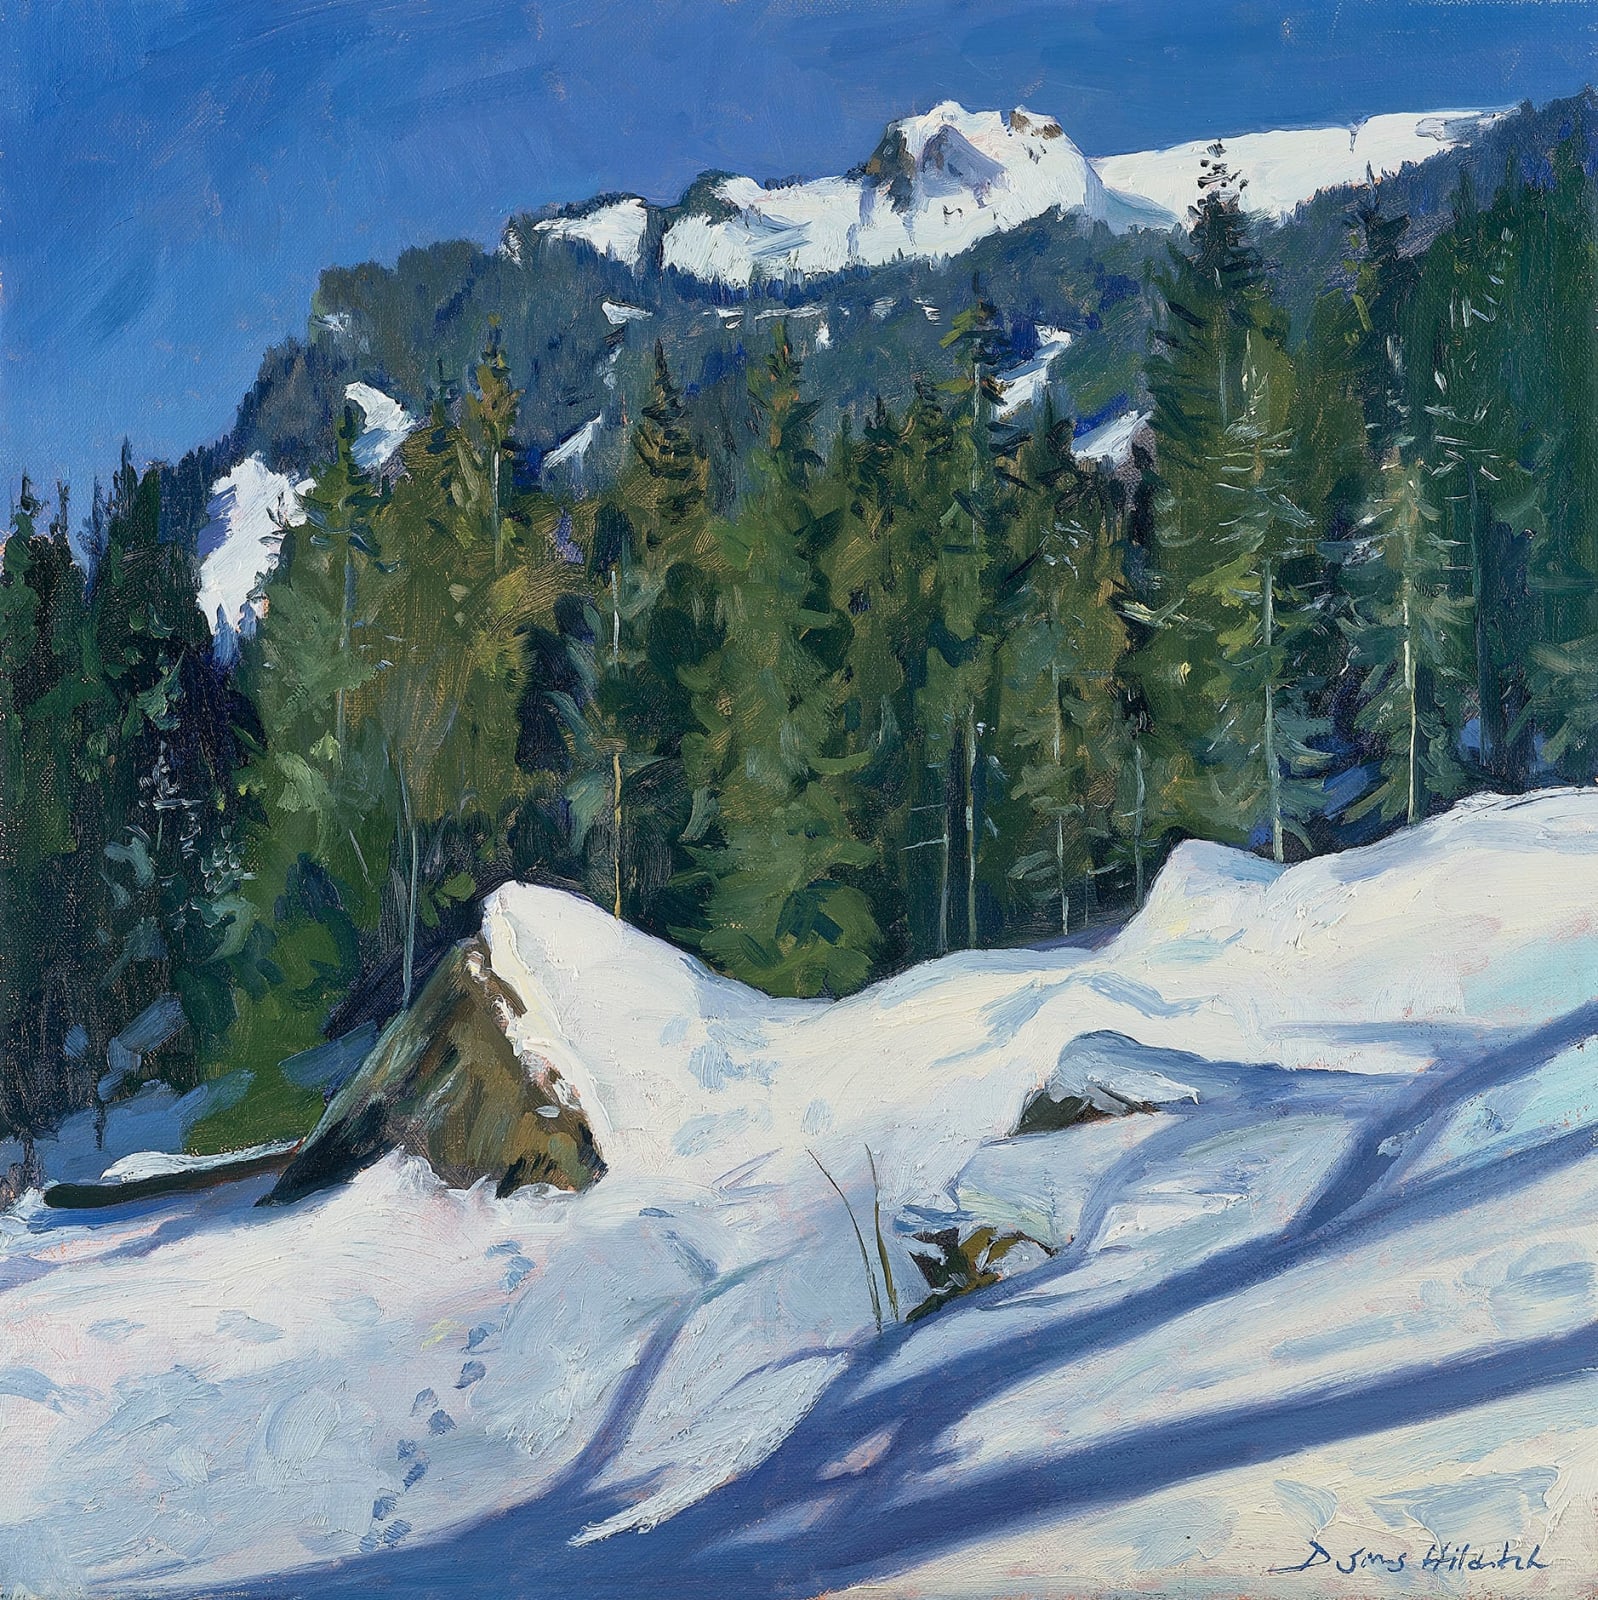 Daisy Sims Hilditch, Deep Blue Skies, Mountain Forest